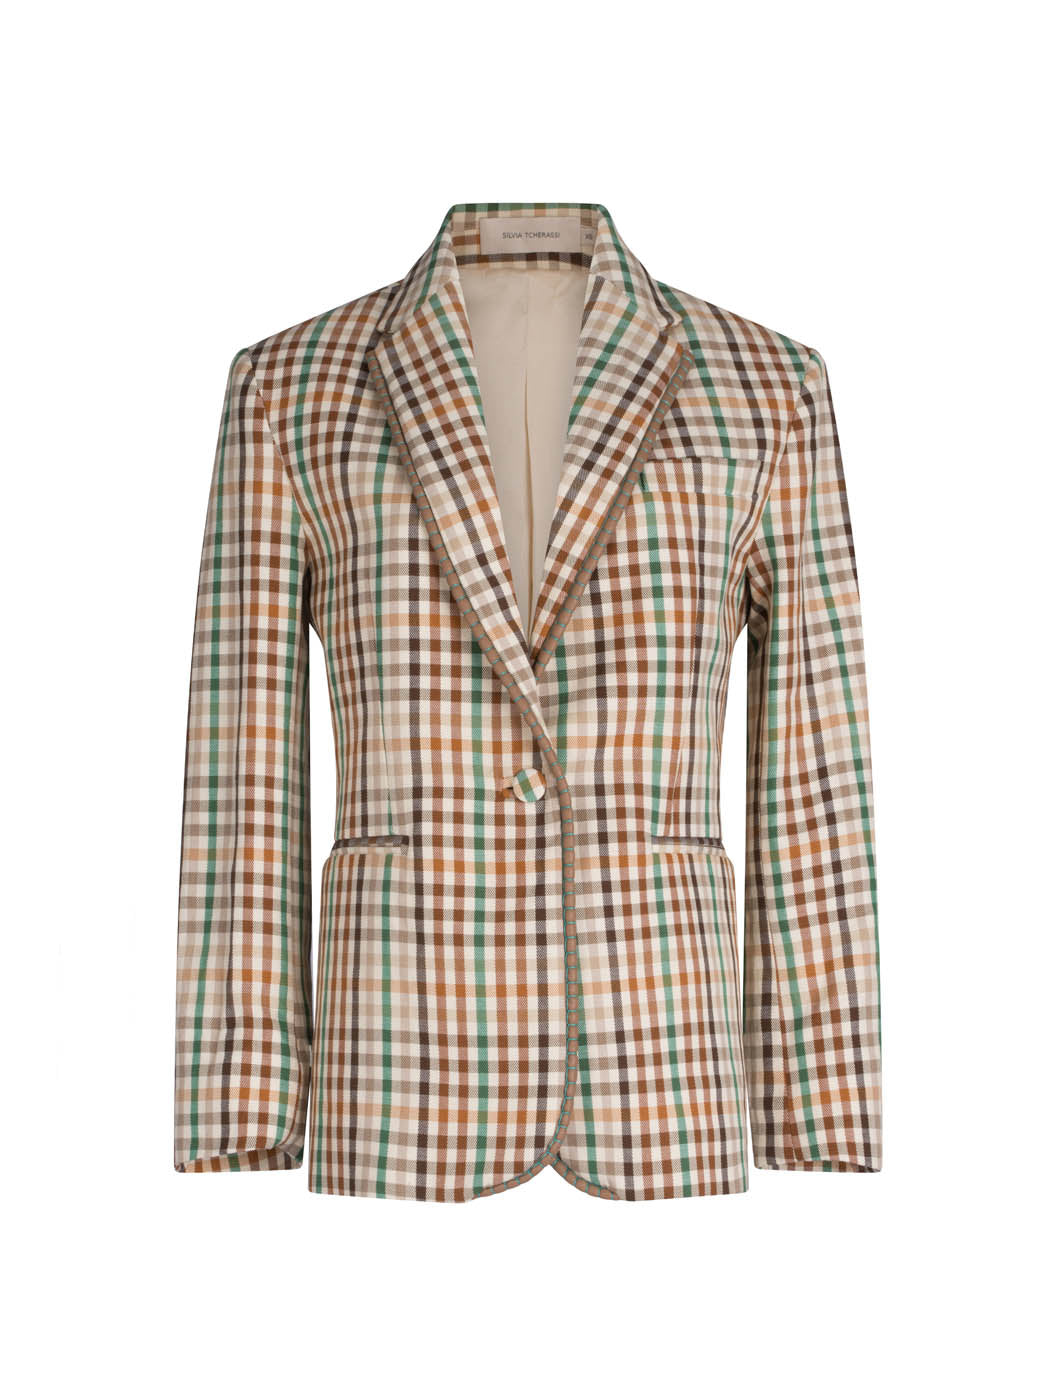 A Haimi Jacket Wilmington Tan Stripes with a notched lapel and front pockets, displayed against a white background.